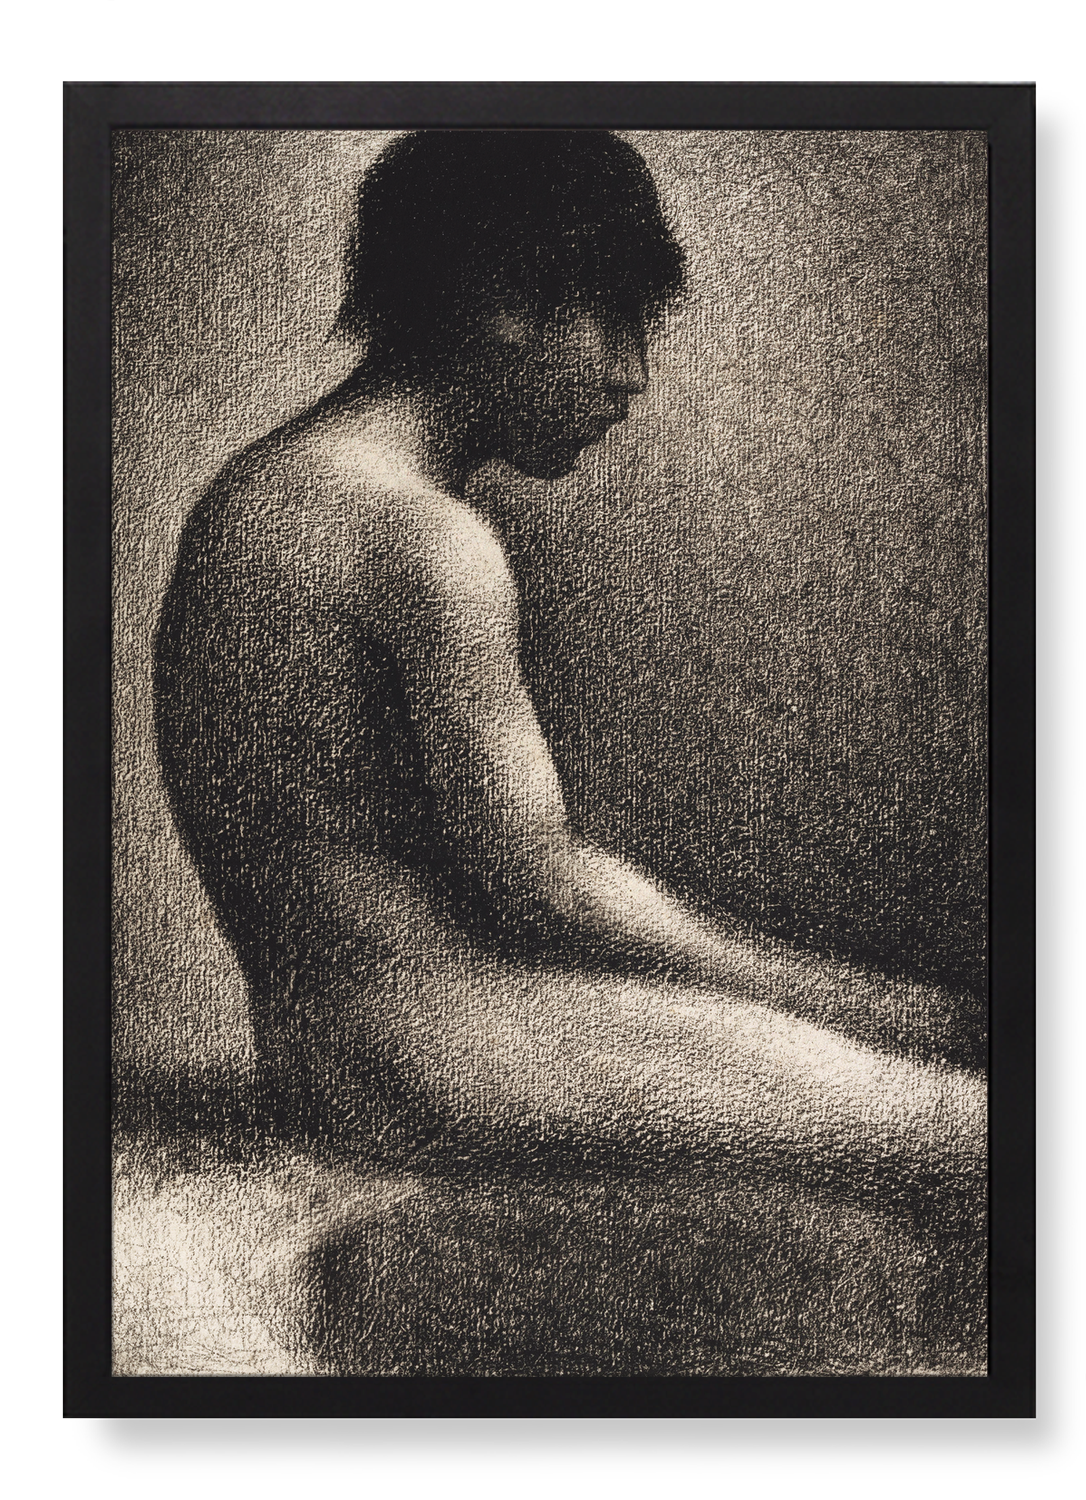 SEATED YOUTH, STUDY FOR 'BATHERS AT ASNIÈRES' (1883)